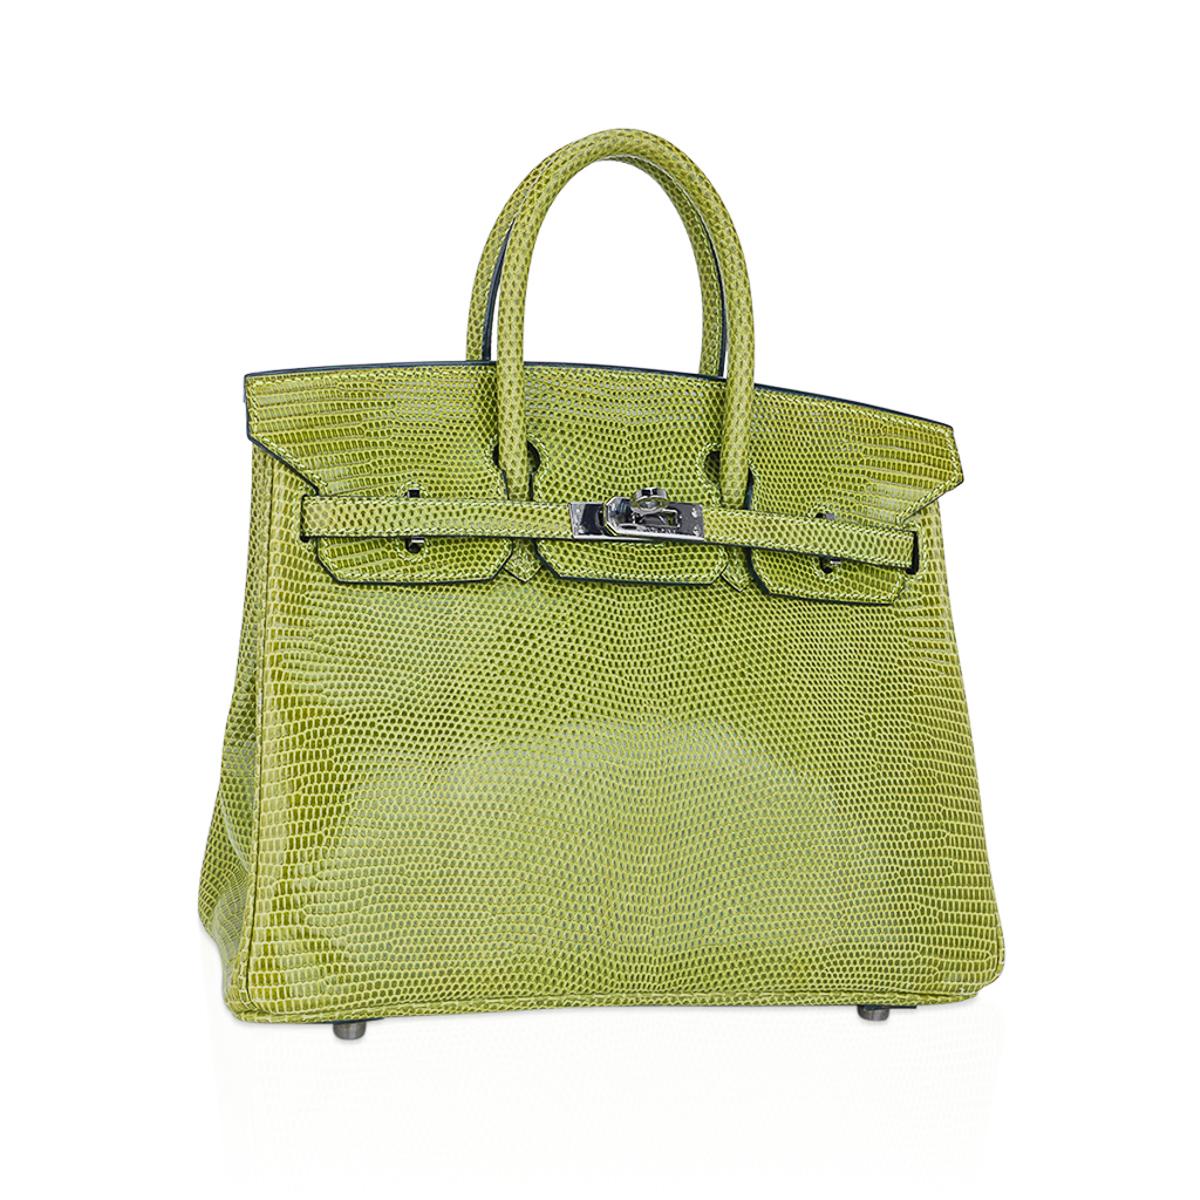 Mightychic offers a limited edition Hermes Birkin 25 bag featured in Vert Anis Lizard.
This extremely rare Hermes Birkin bag is elegant, timeless and absolutely stunning.
Vert Anis is a bitter green and this neutral colour is perfect for year round